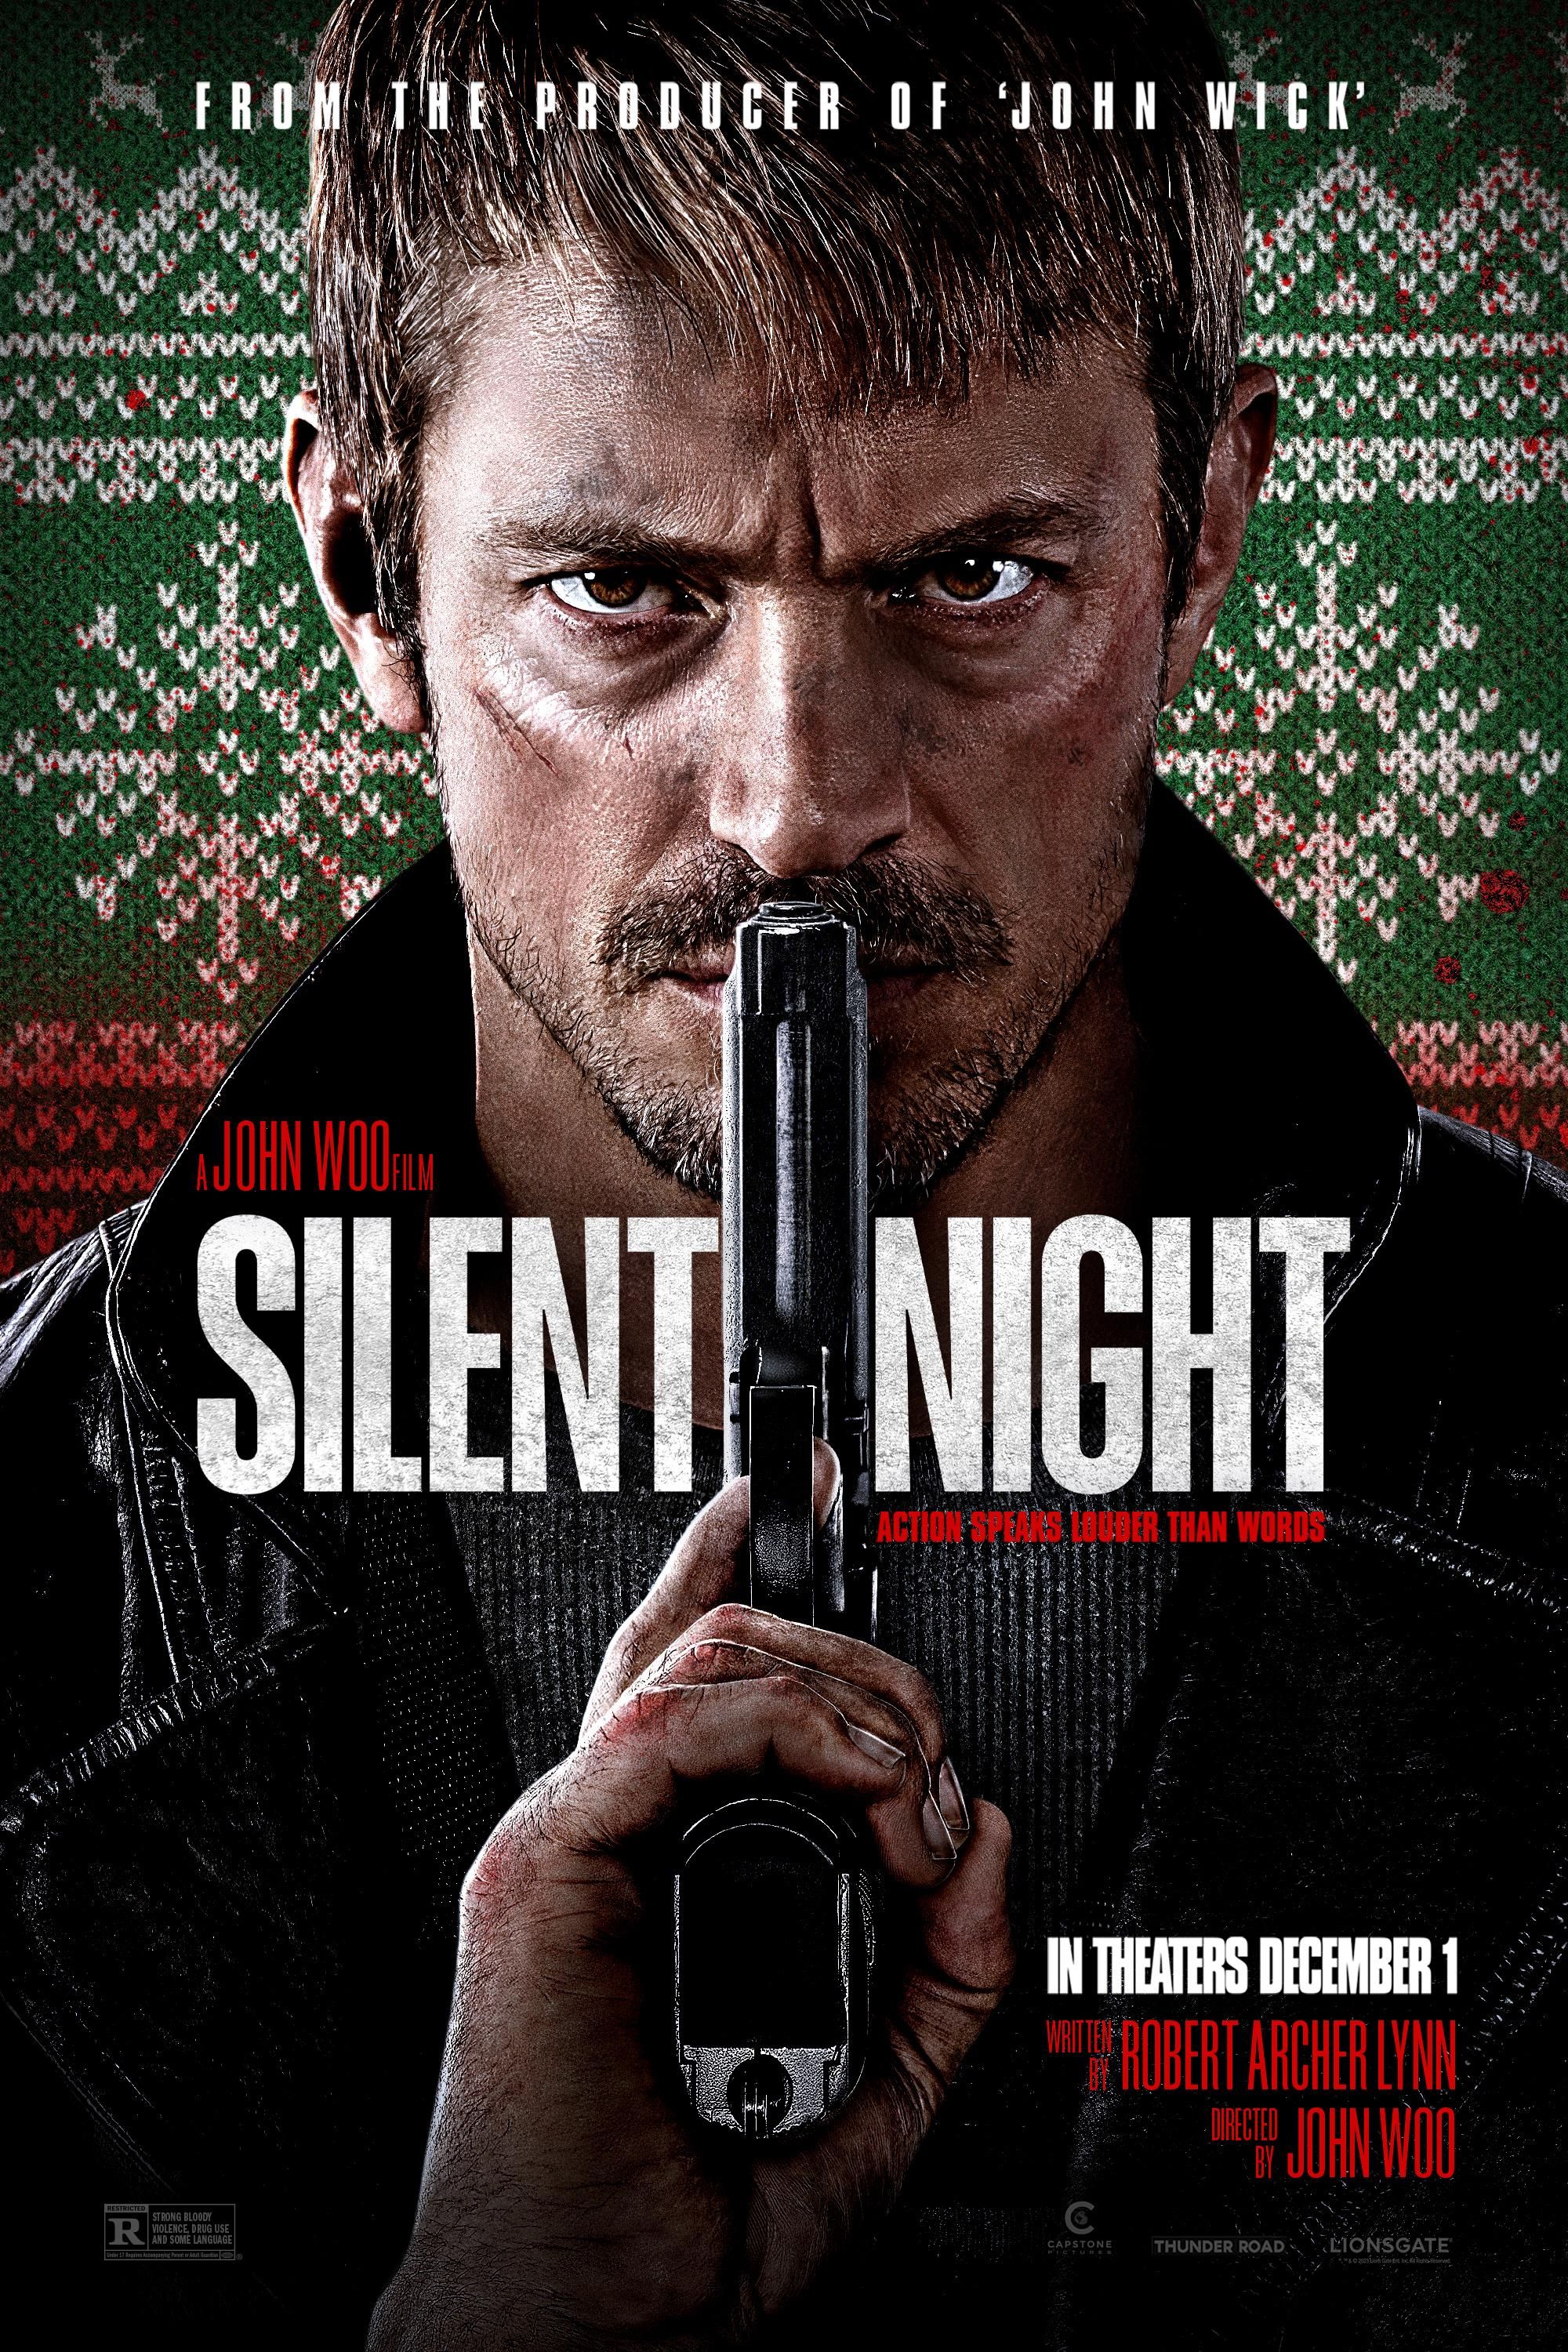 Where to Watch 'Silent Night' - Find Showtimes